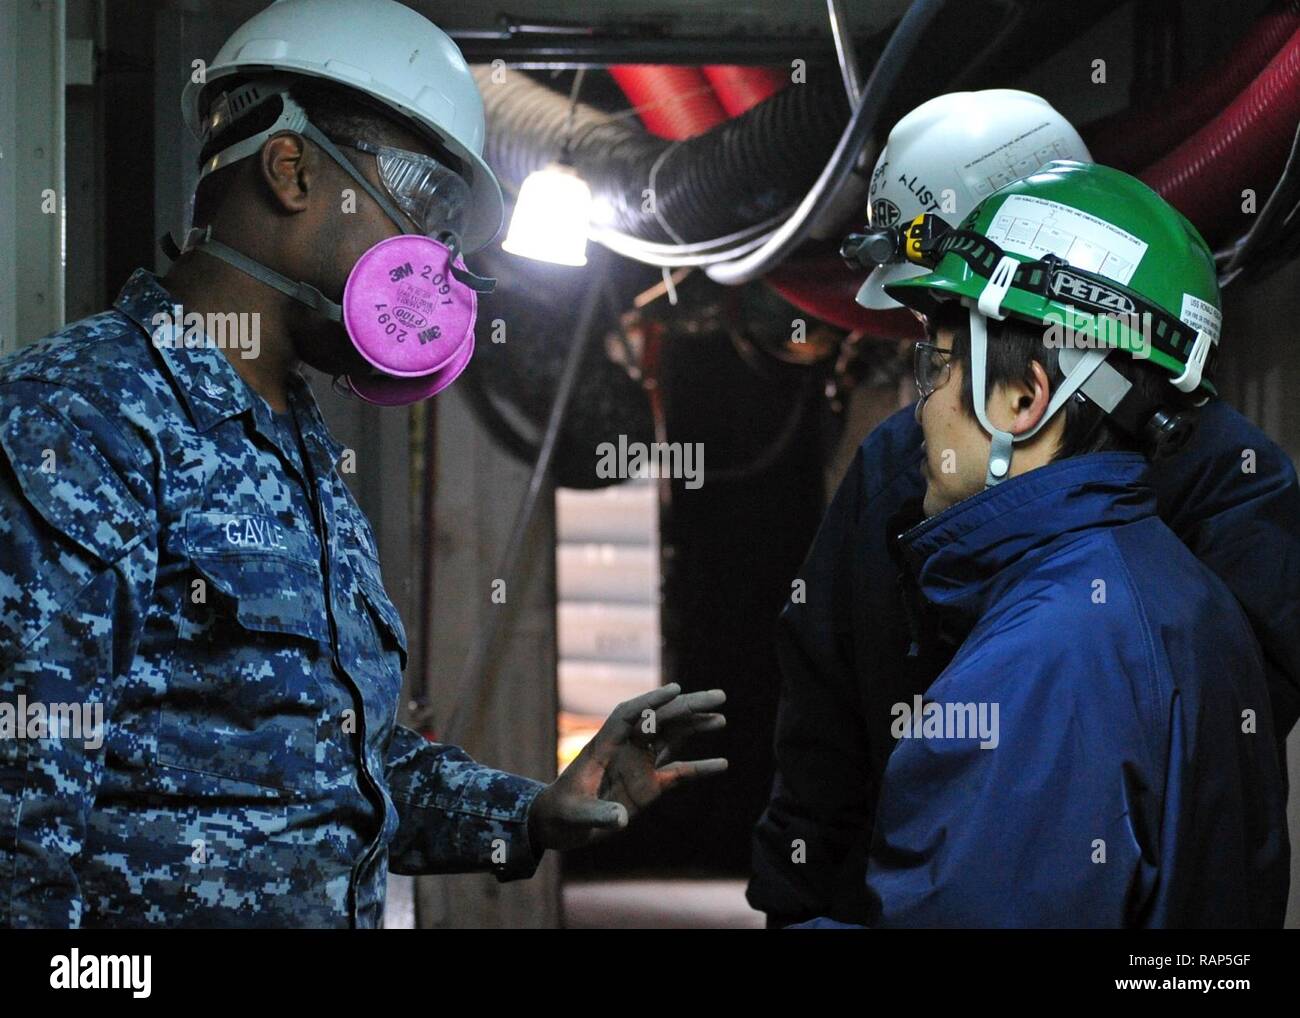 YOKOSUKA, Japan (Feb. 22, 2017) - Hospital Corpsman 3rd Class Patrick Gayle from Jacksonville, Fla., attached to the U.S. 7th Fleet flagship USS Blue Ridge (LCC 19), speaks with personnel from Ship's Repair Facility Yokosuka. Blue Ridge is in an extensive maintenance period in order to modernize the ship to continue to serve as a robust communications platform in the U.S. 7th Fleet area of operations. Stock Photo